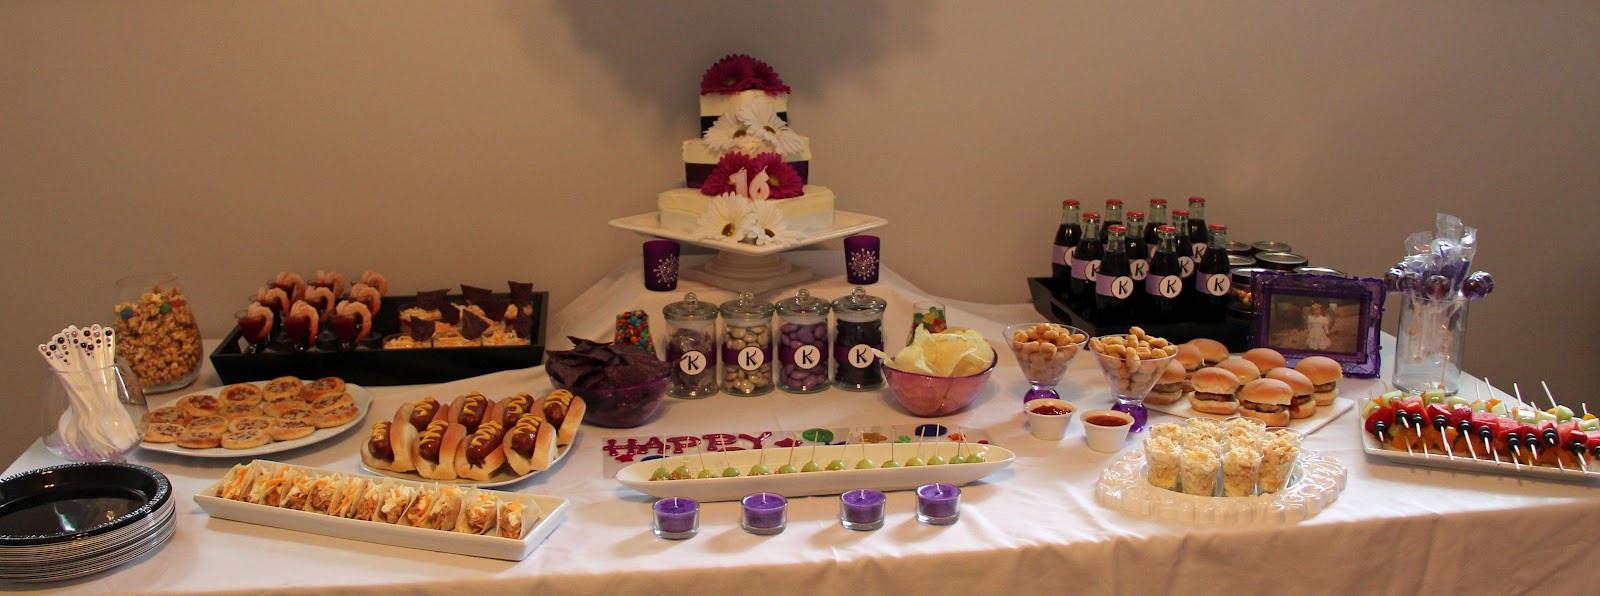 16Th Birthday Party Food Ideas
 Jo and Sue Kenzie s Sweet 16